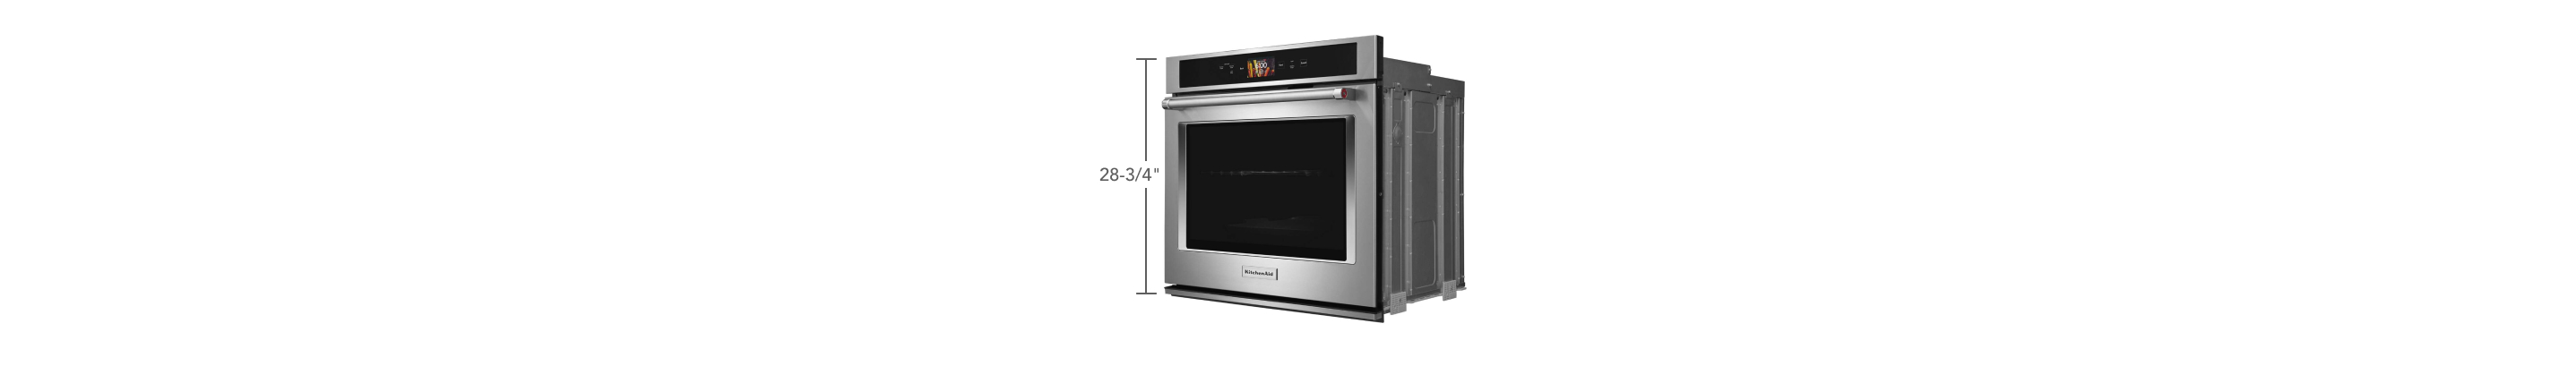 Wall Oven Sizes: How To Choose The Right Fit | Kitchenaid